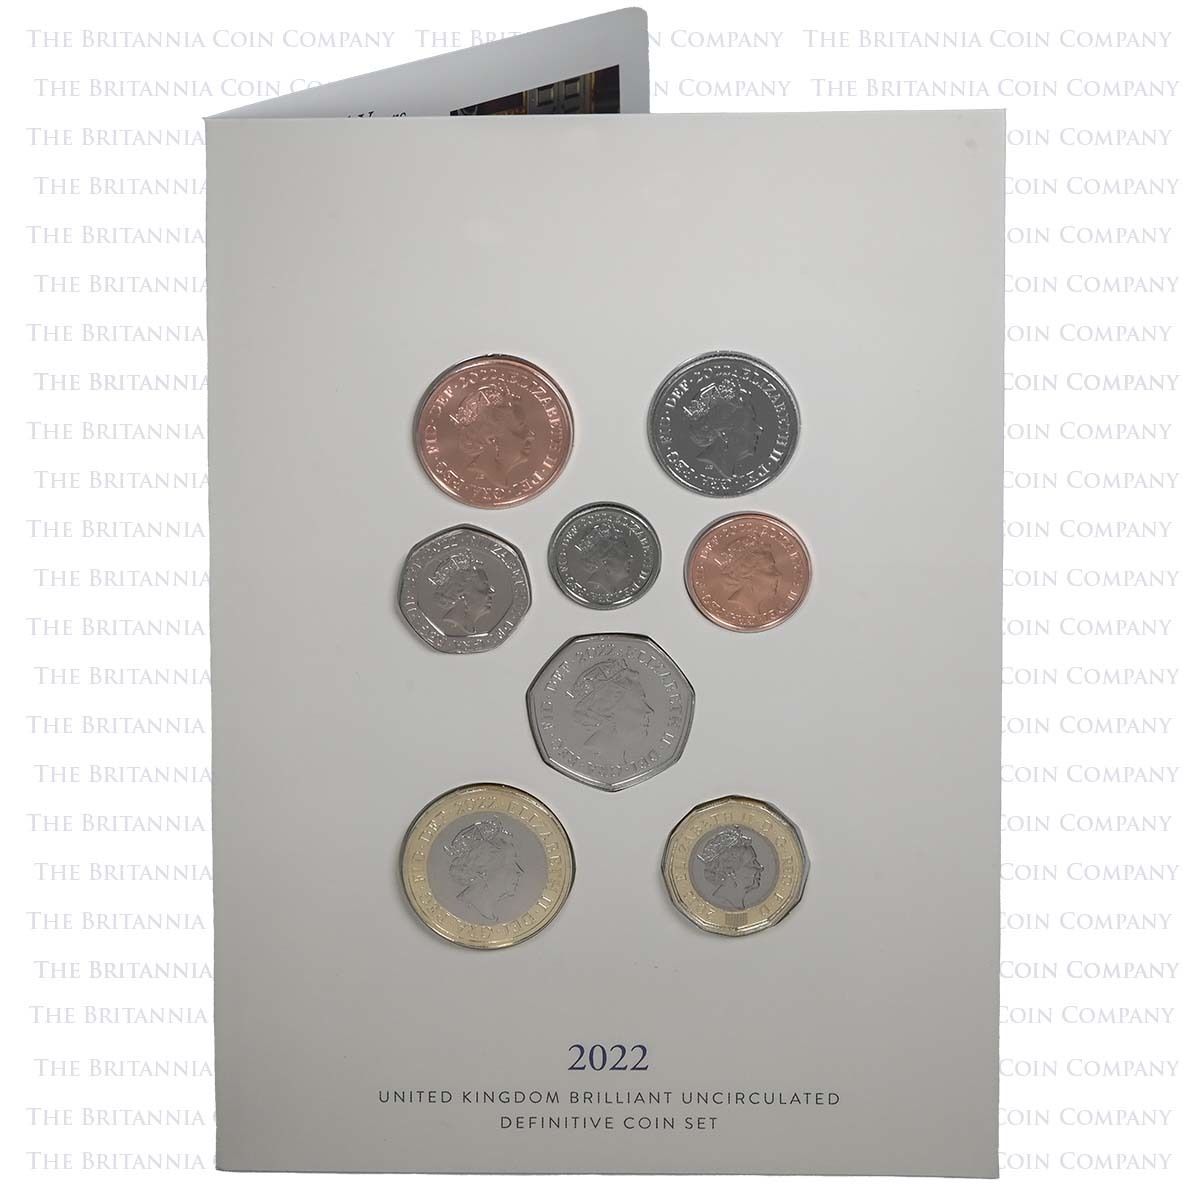 2022 Annual 8 Coin Definitive Set Brilliant Uncirculated Platinum Jubilee Coins